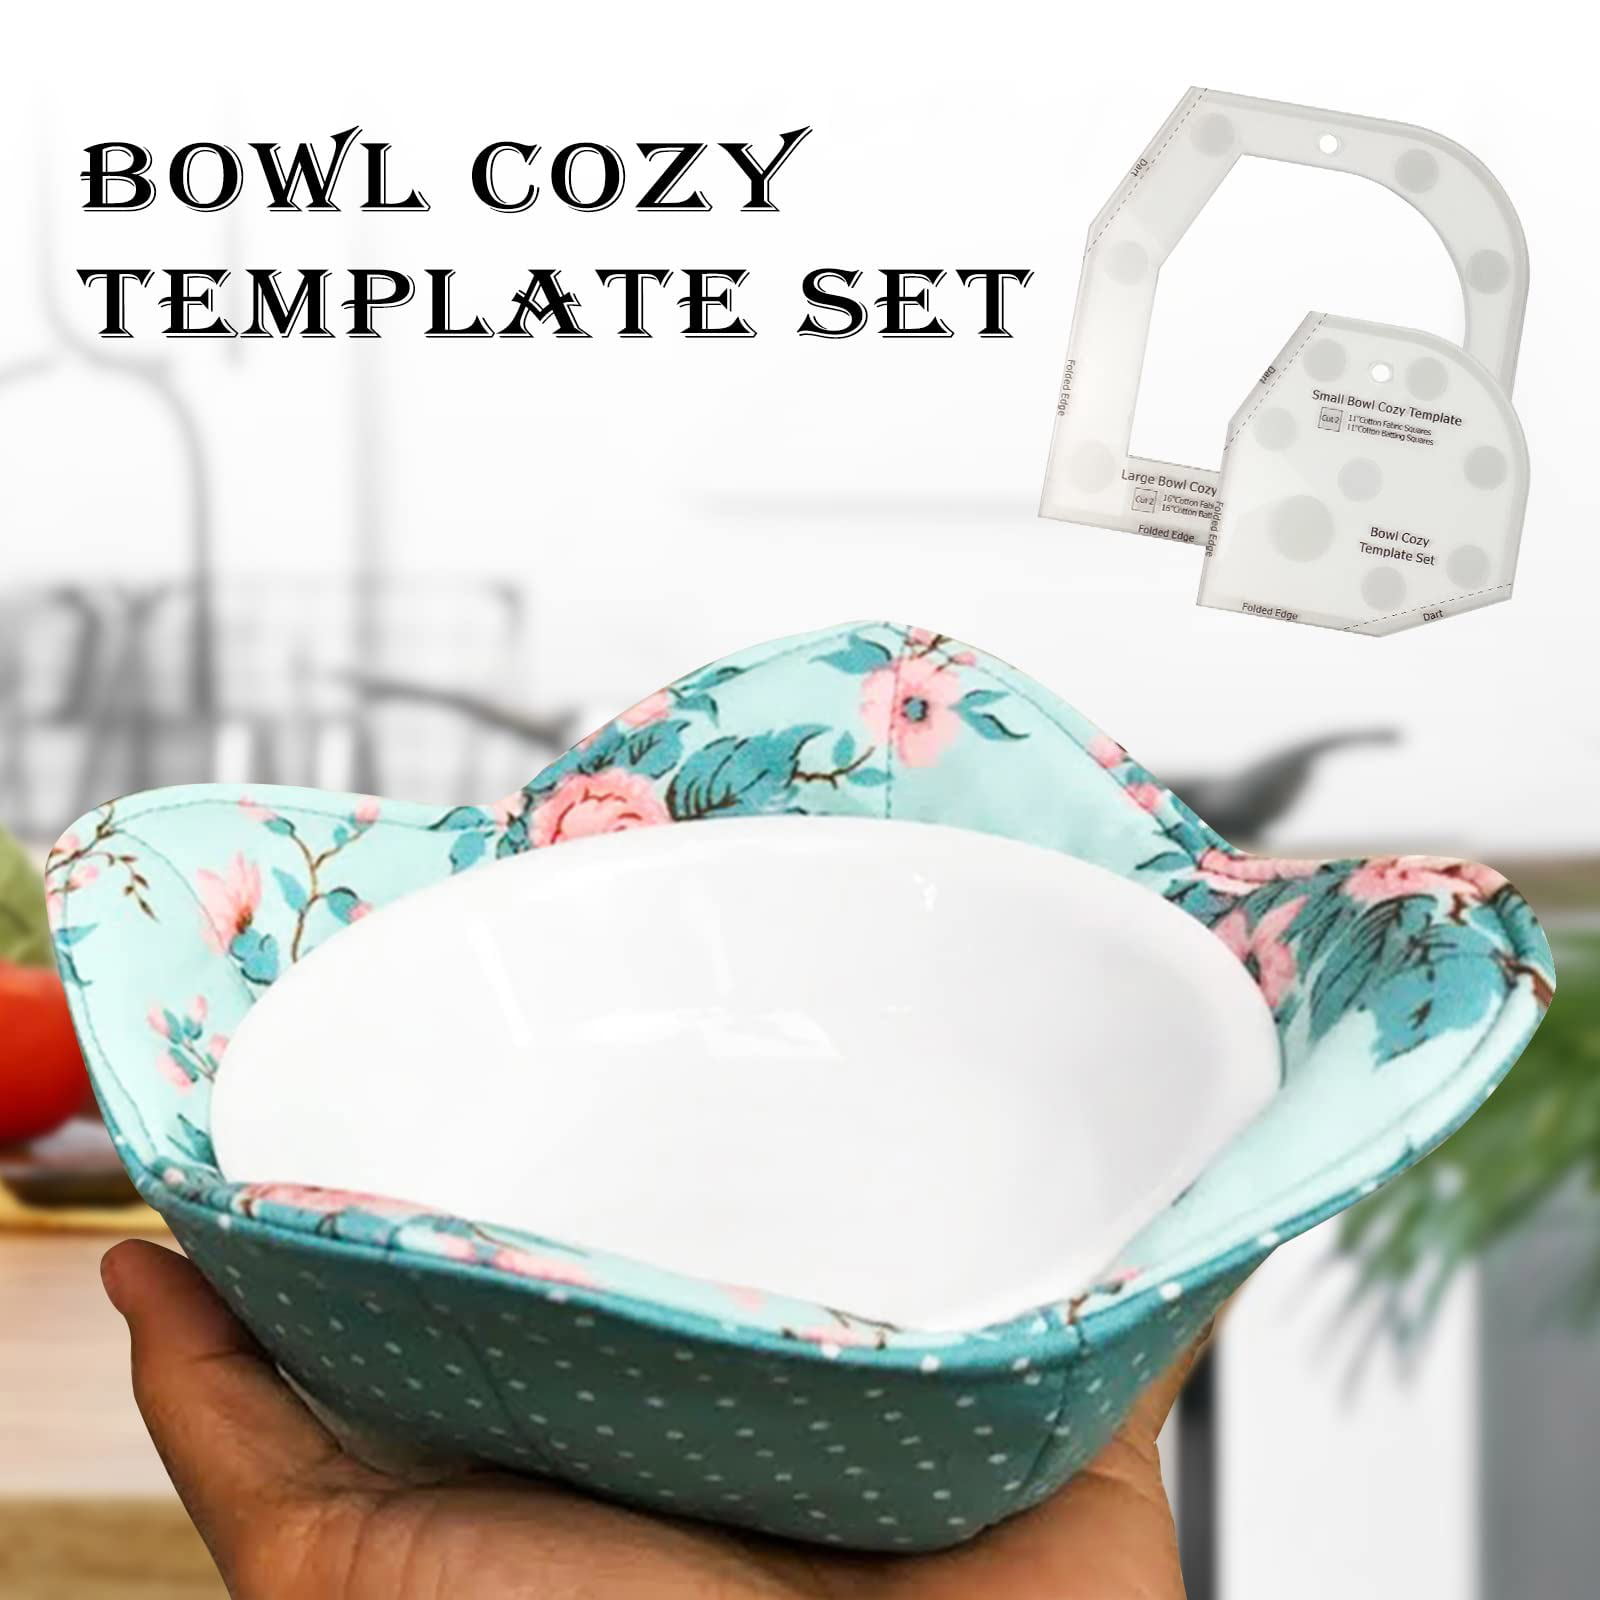 10 inches Bowl Cozy Pattern Template for Sewing,DIY Craft Stencil Cut on Fold Template Sewing,Clear Acrylic Bowl Wrap Sewing Pattern Template Quilting Template Bowl Cozy Template Cutting Ruler Set 